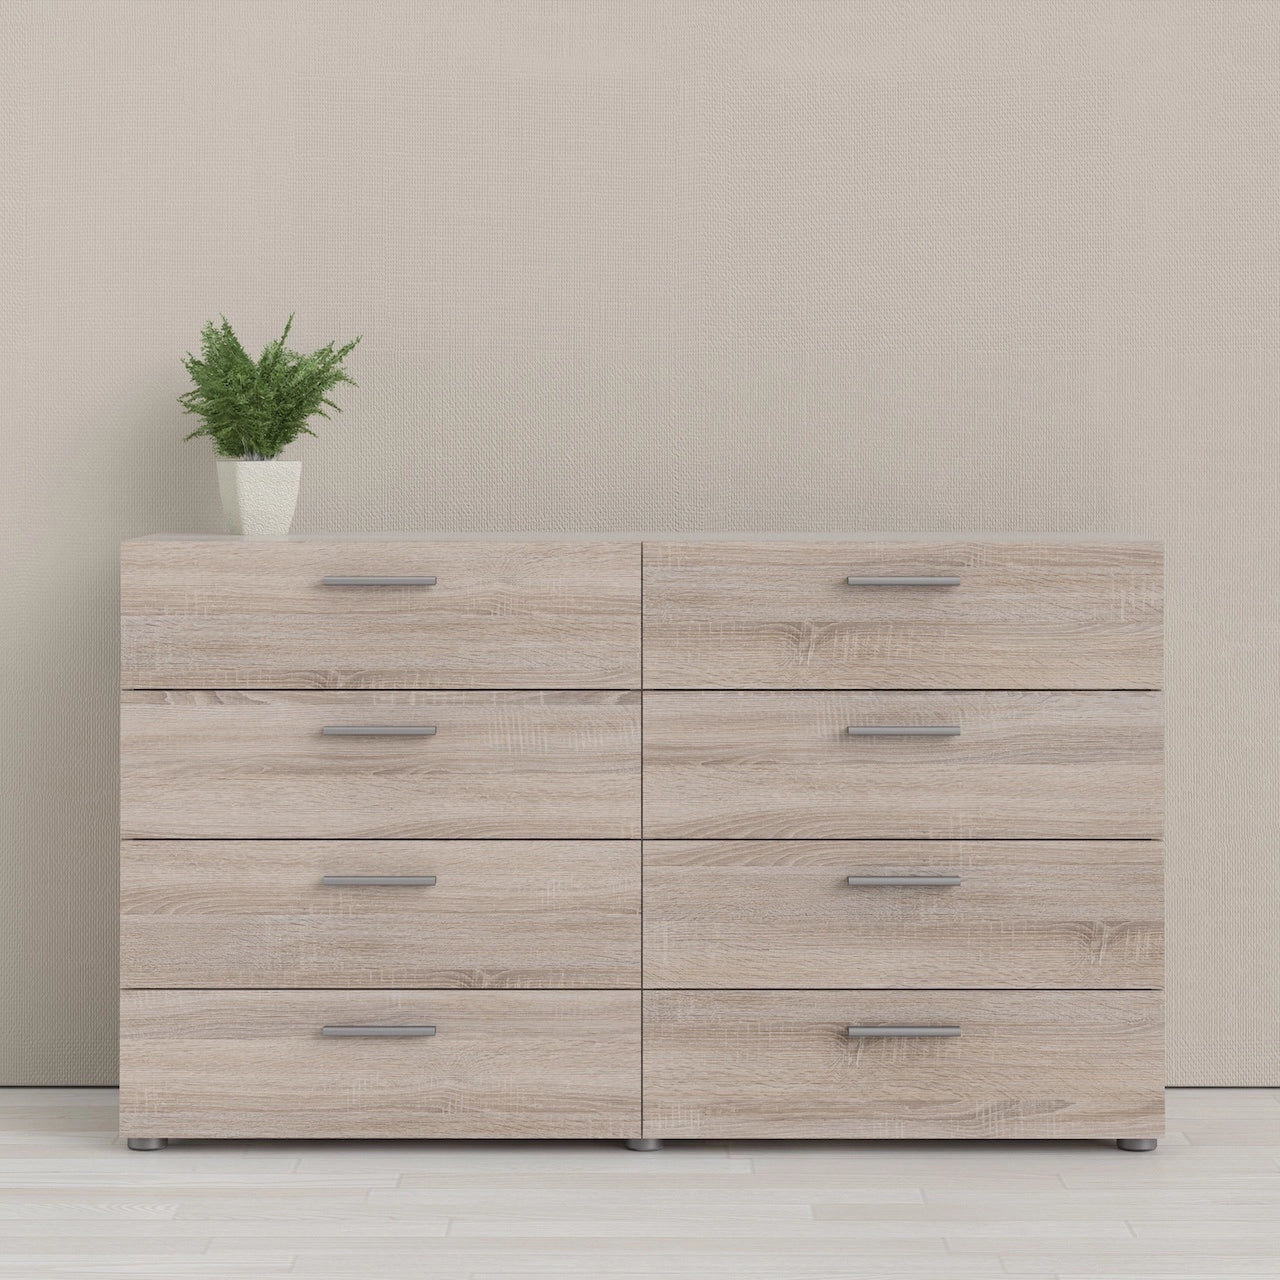 Furniture To Go Pepe Wide Chest of 8 Drawers (4+4) in Truffle Oak